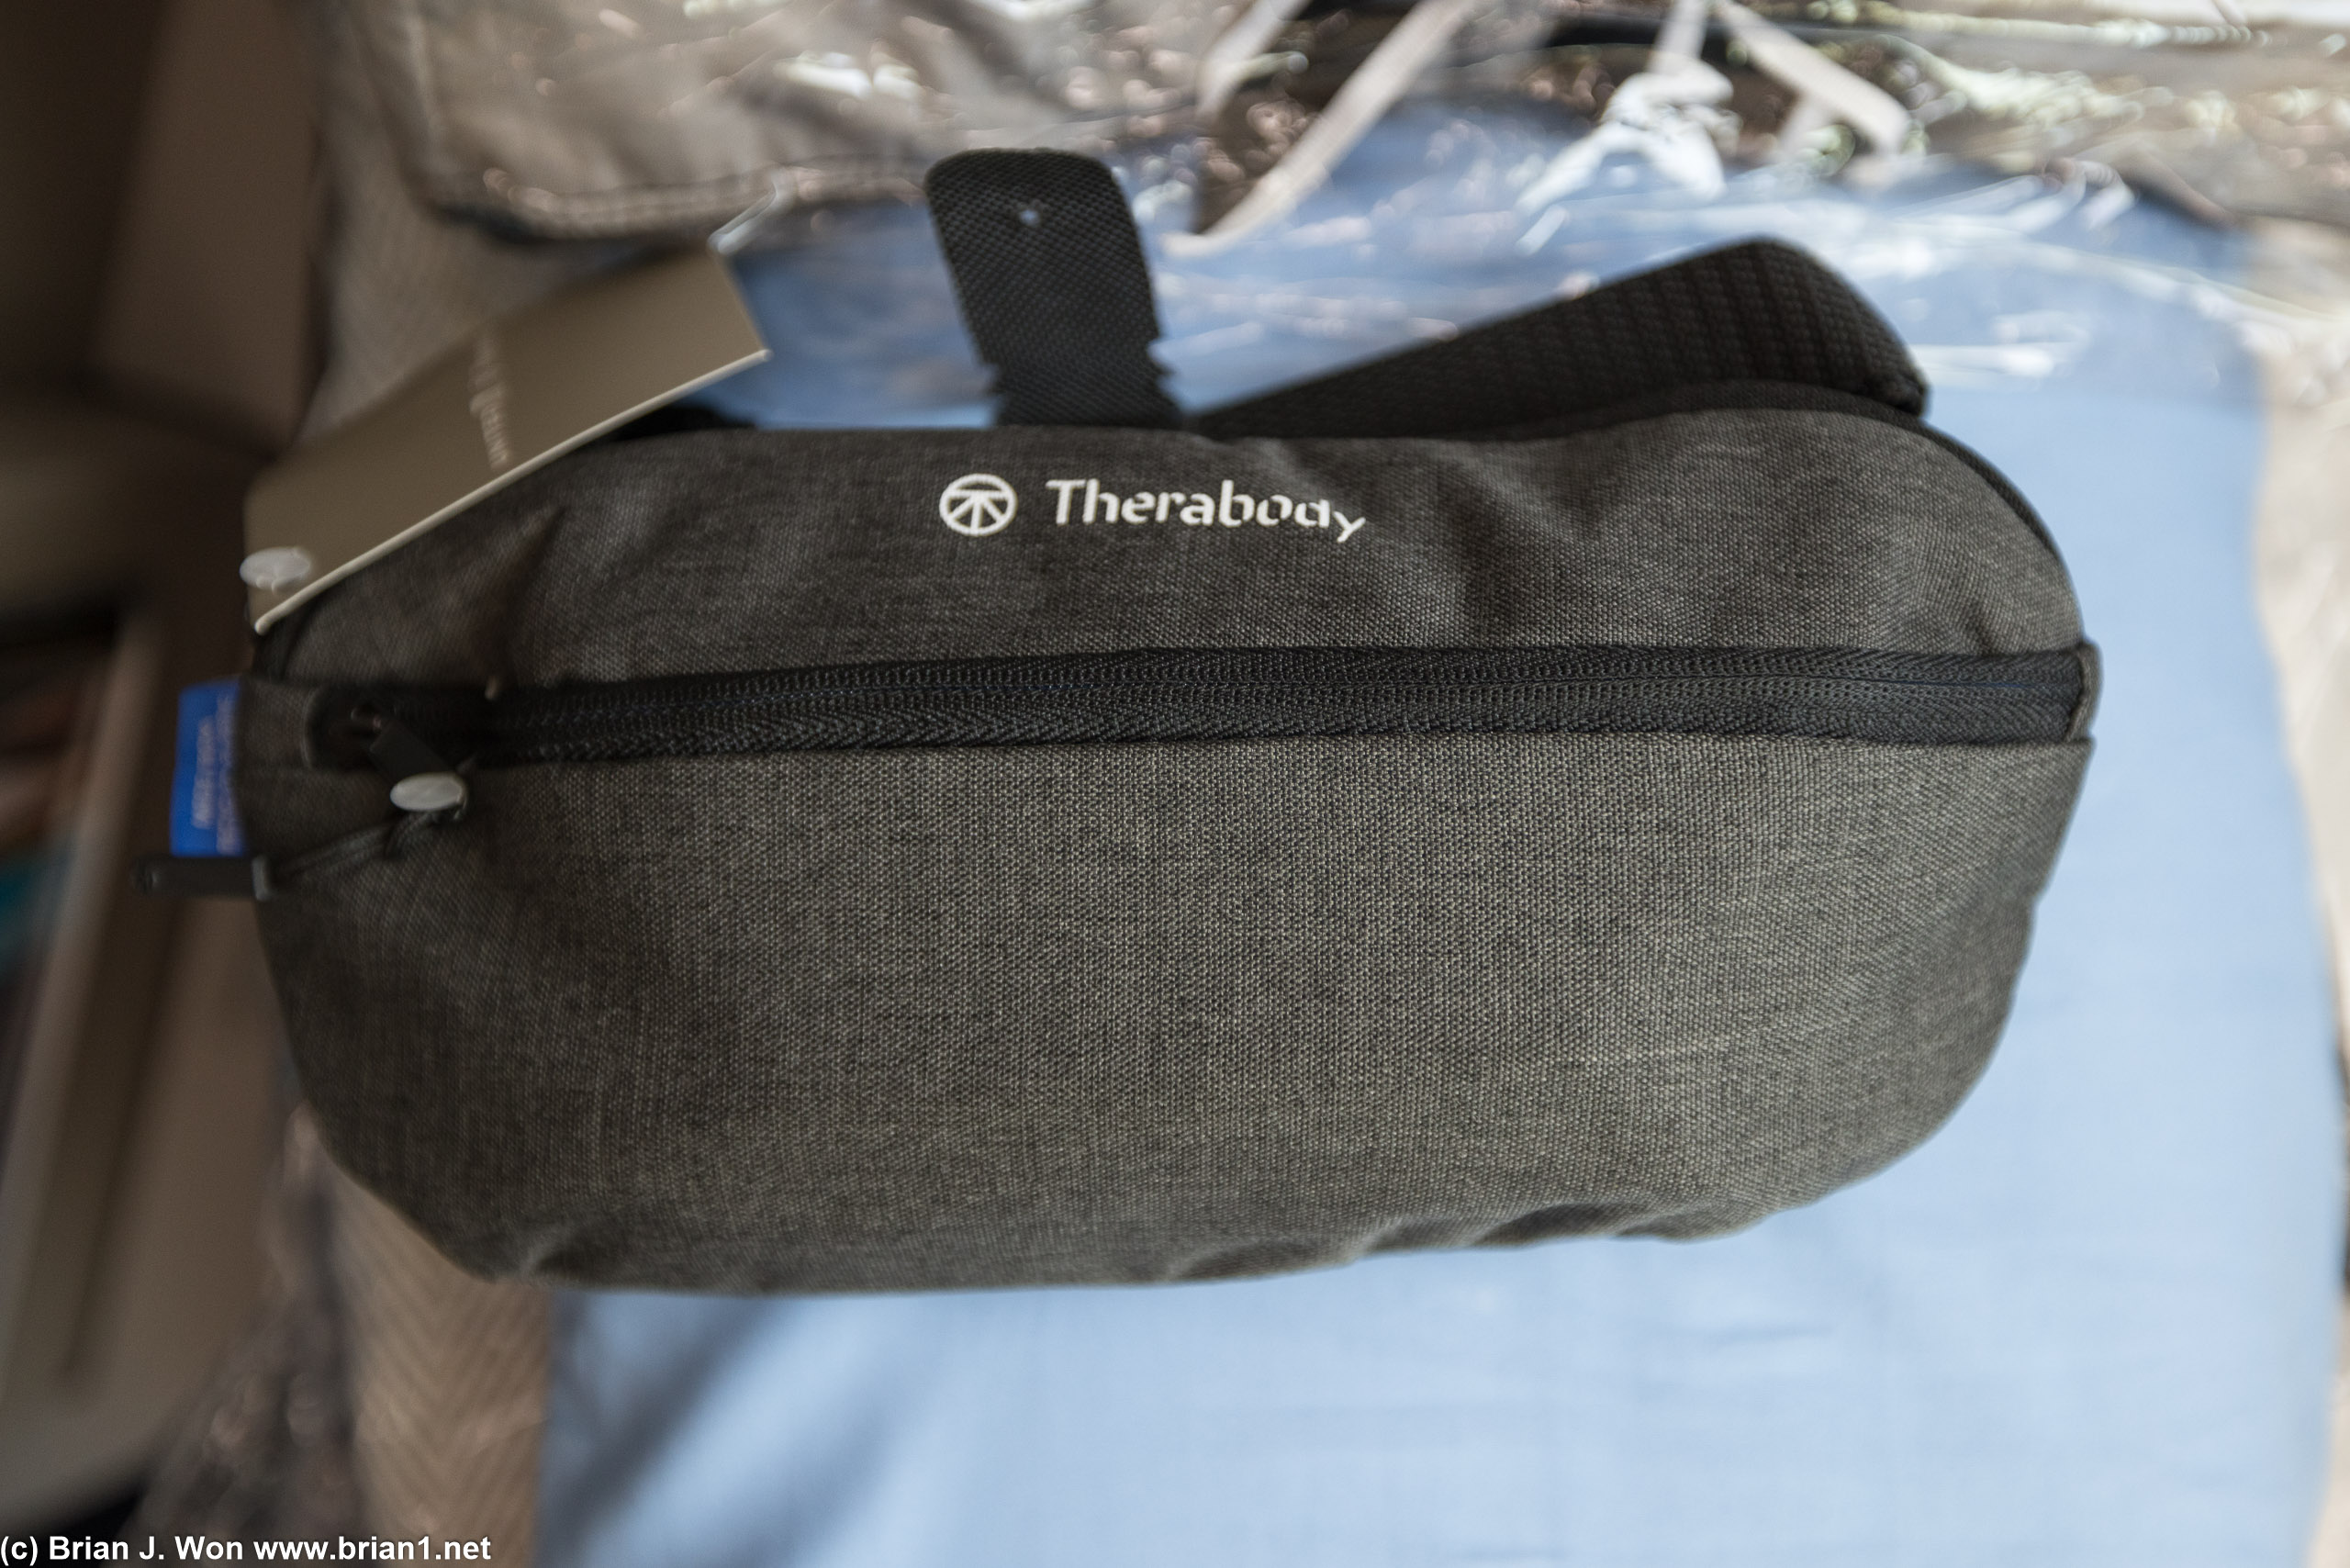 Therabody is the hot brand now for amenity kits?